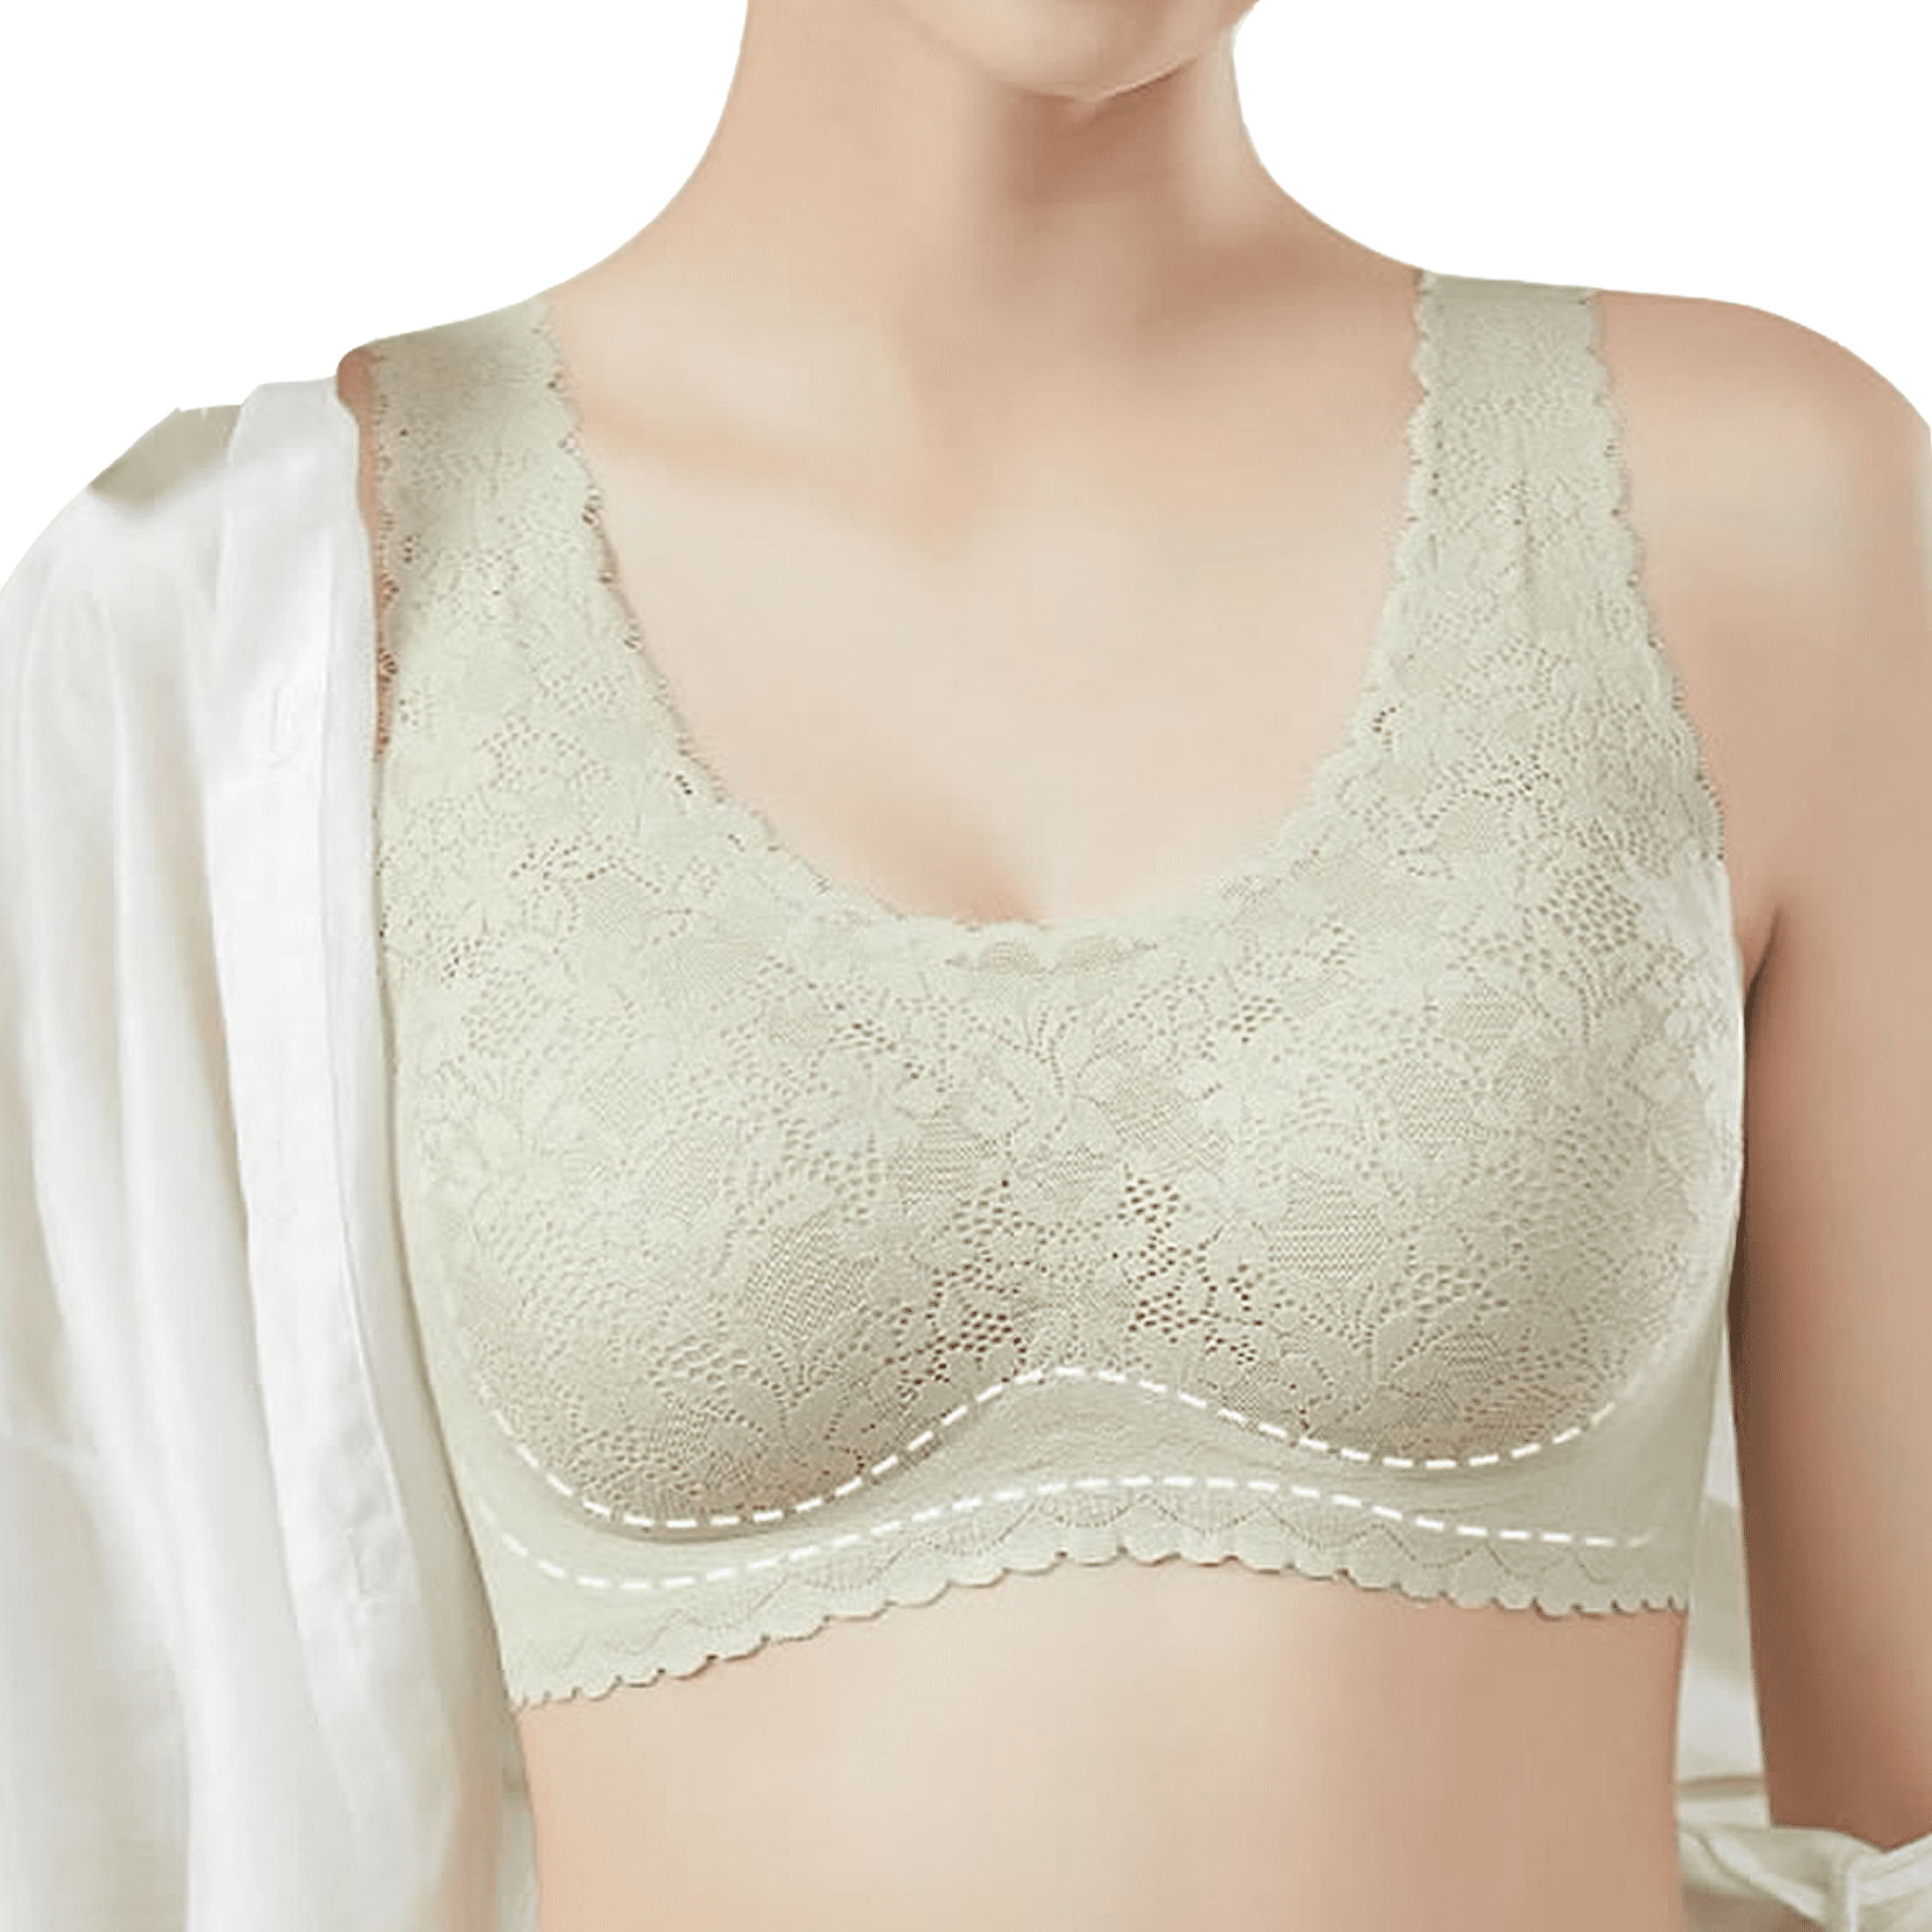 Women Comfort Mastectomy Bras with Pockets for Breast Prosthesis